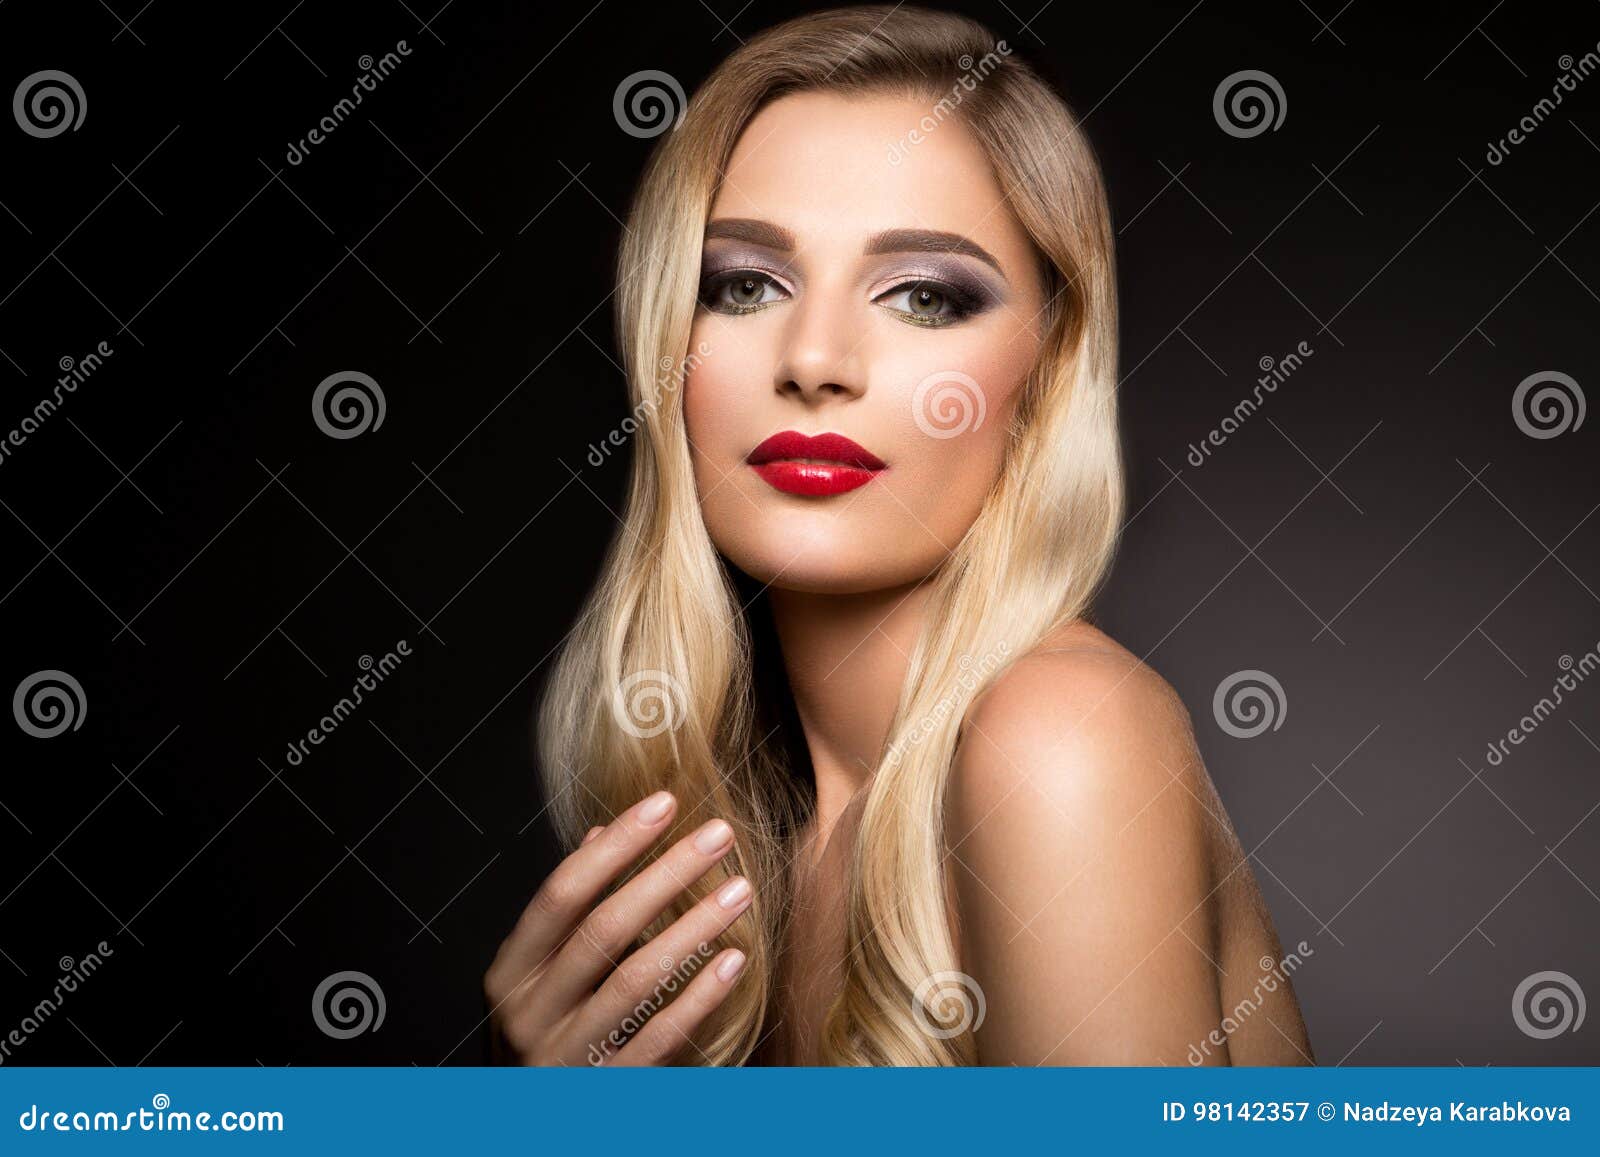 beautiful blonde model girl with long curly hair . hairstyle wavy curls . red lips.